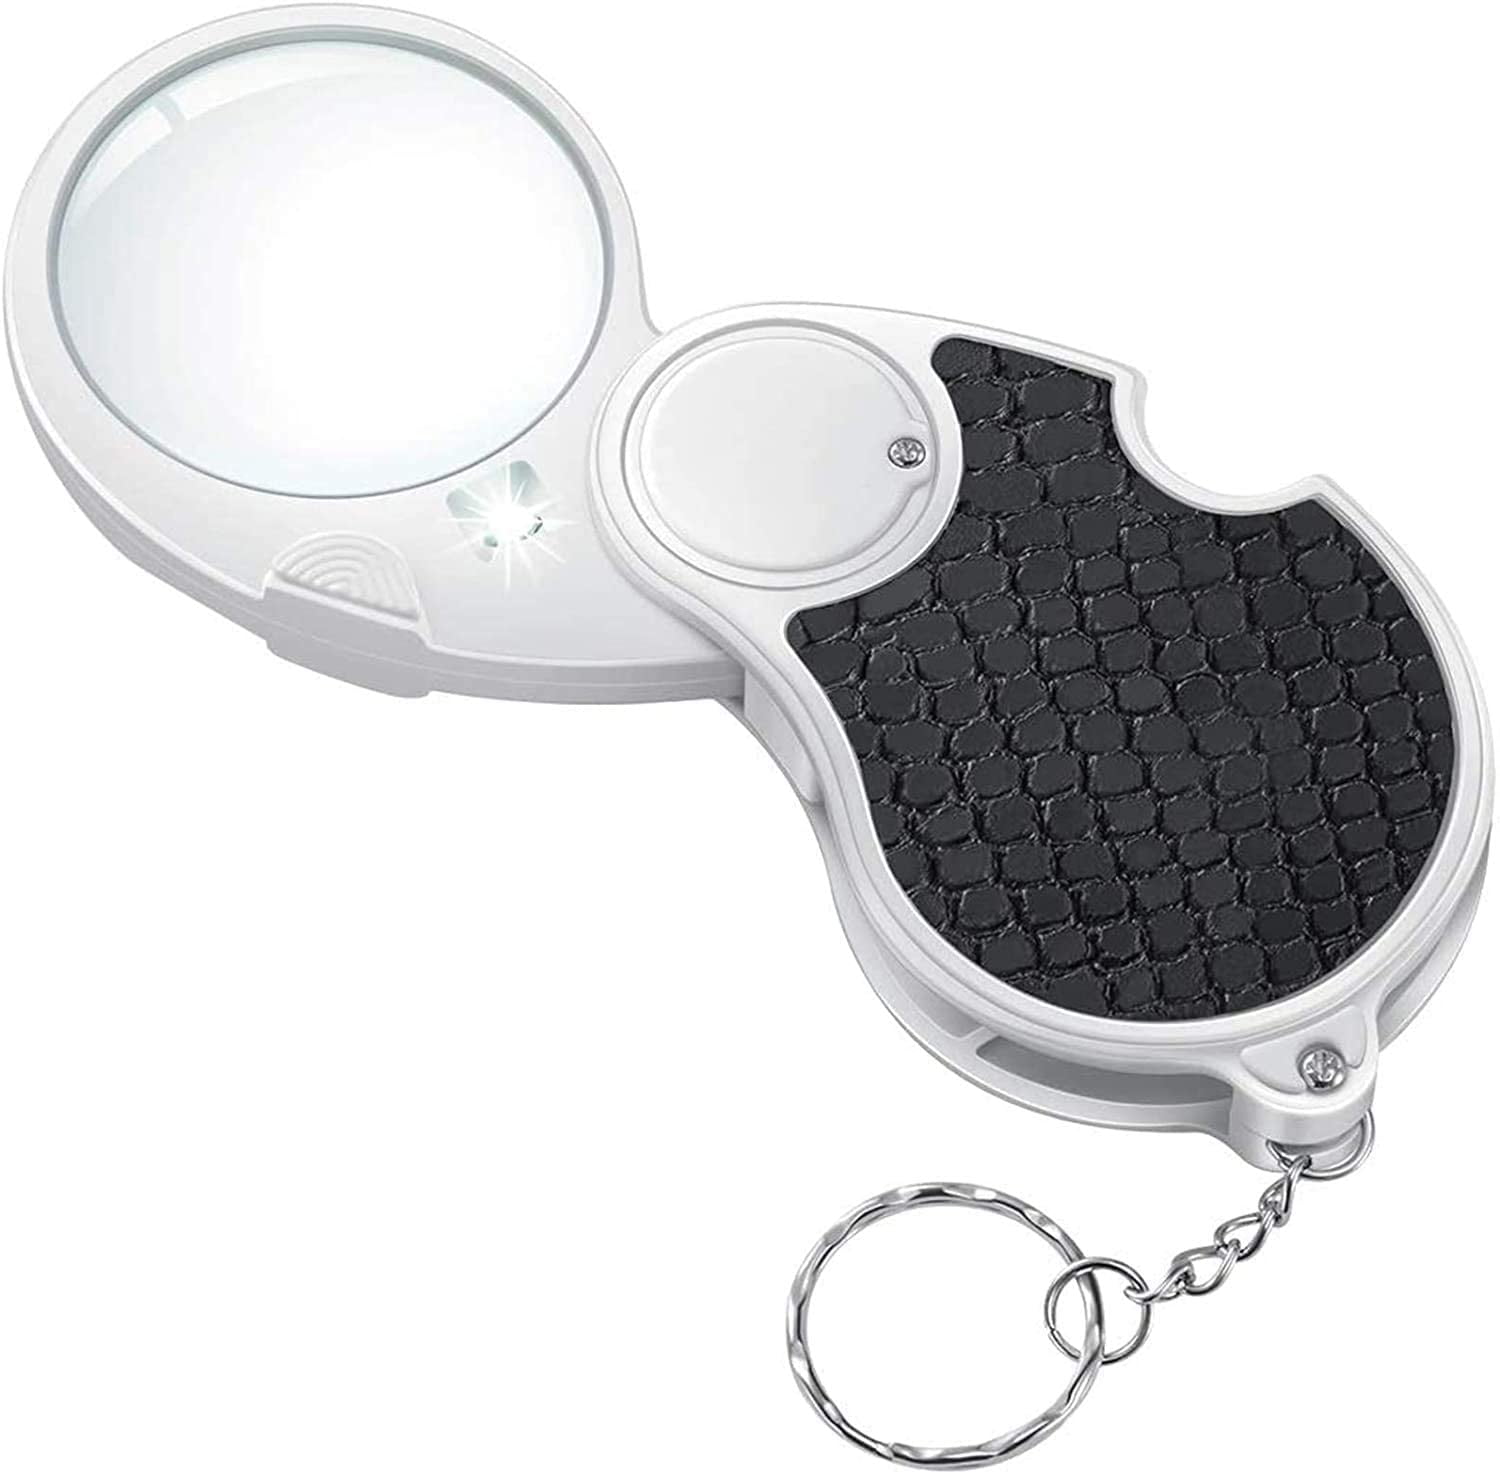 Heldig 75mm 10X Handheld Magnifying Glass Shatterproof Reading Magnifier  for Seniors and Kids, Real Glass Magnifying Lens with Non-Slip Rubber  Handle